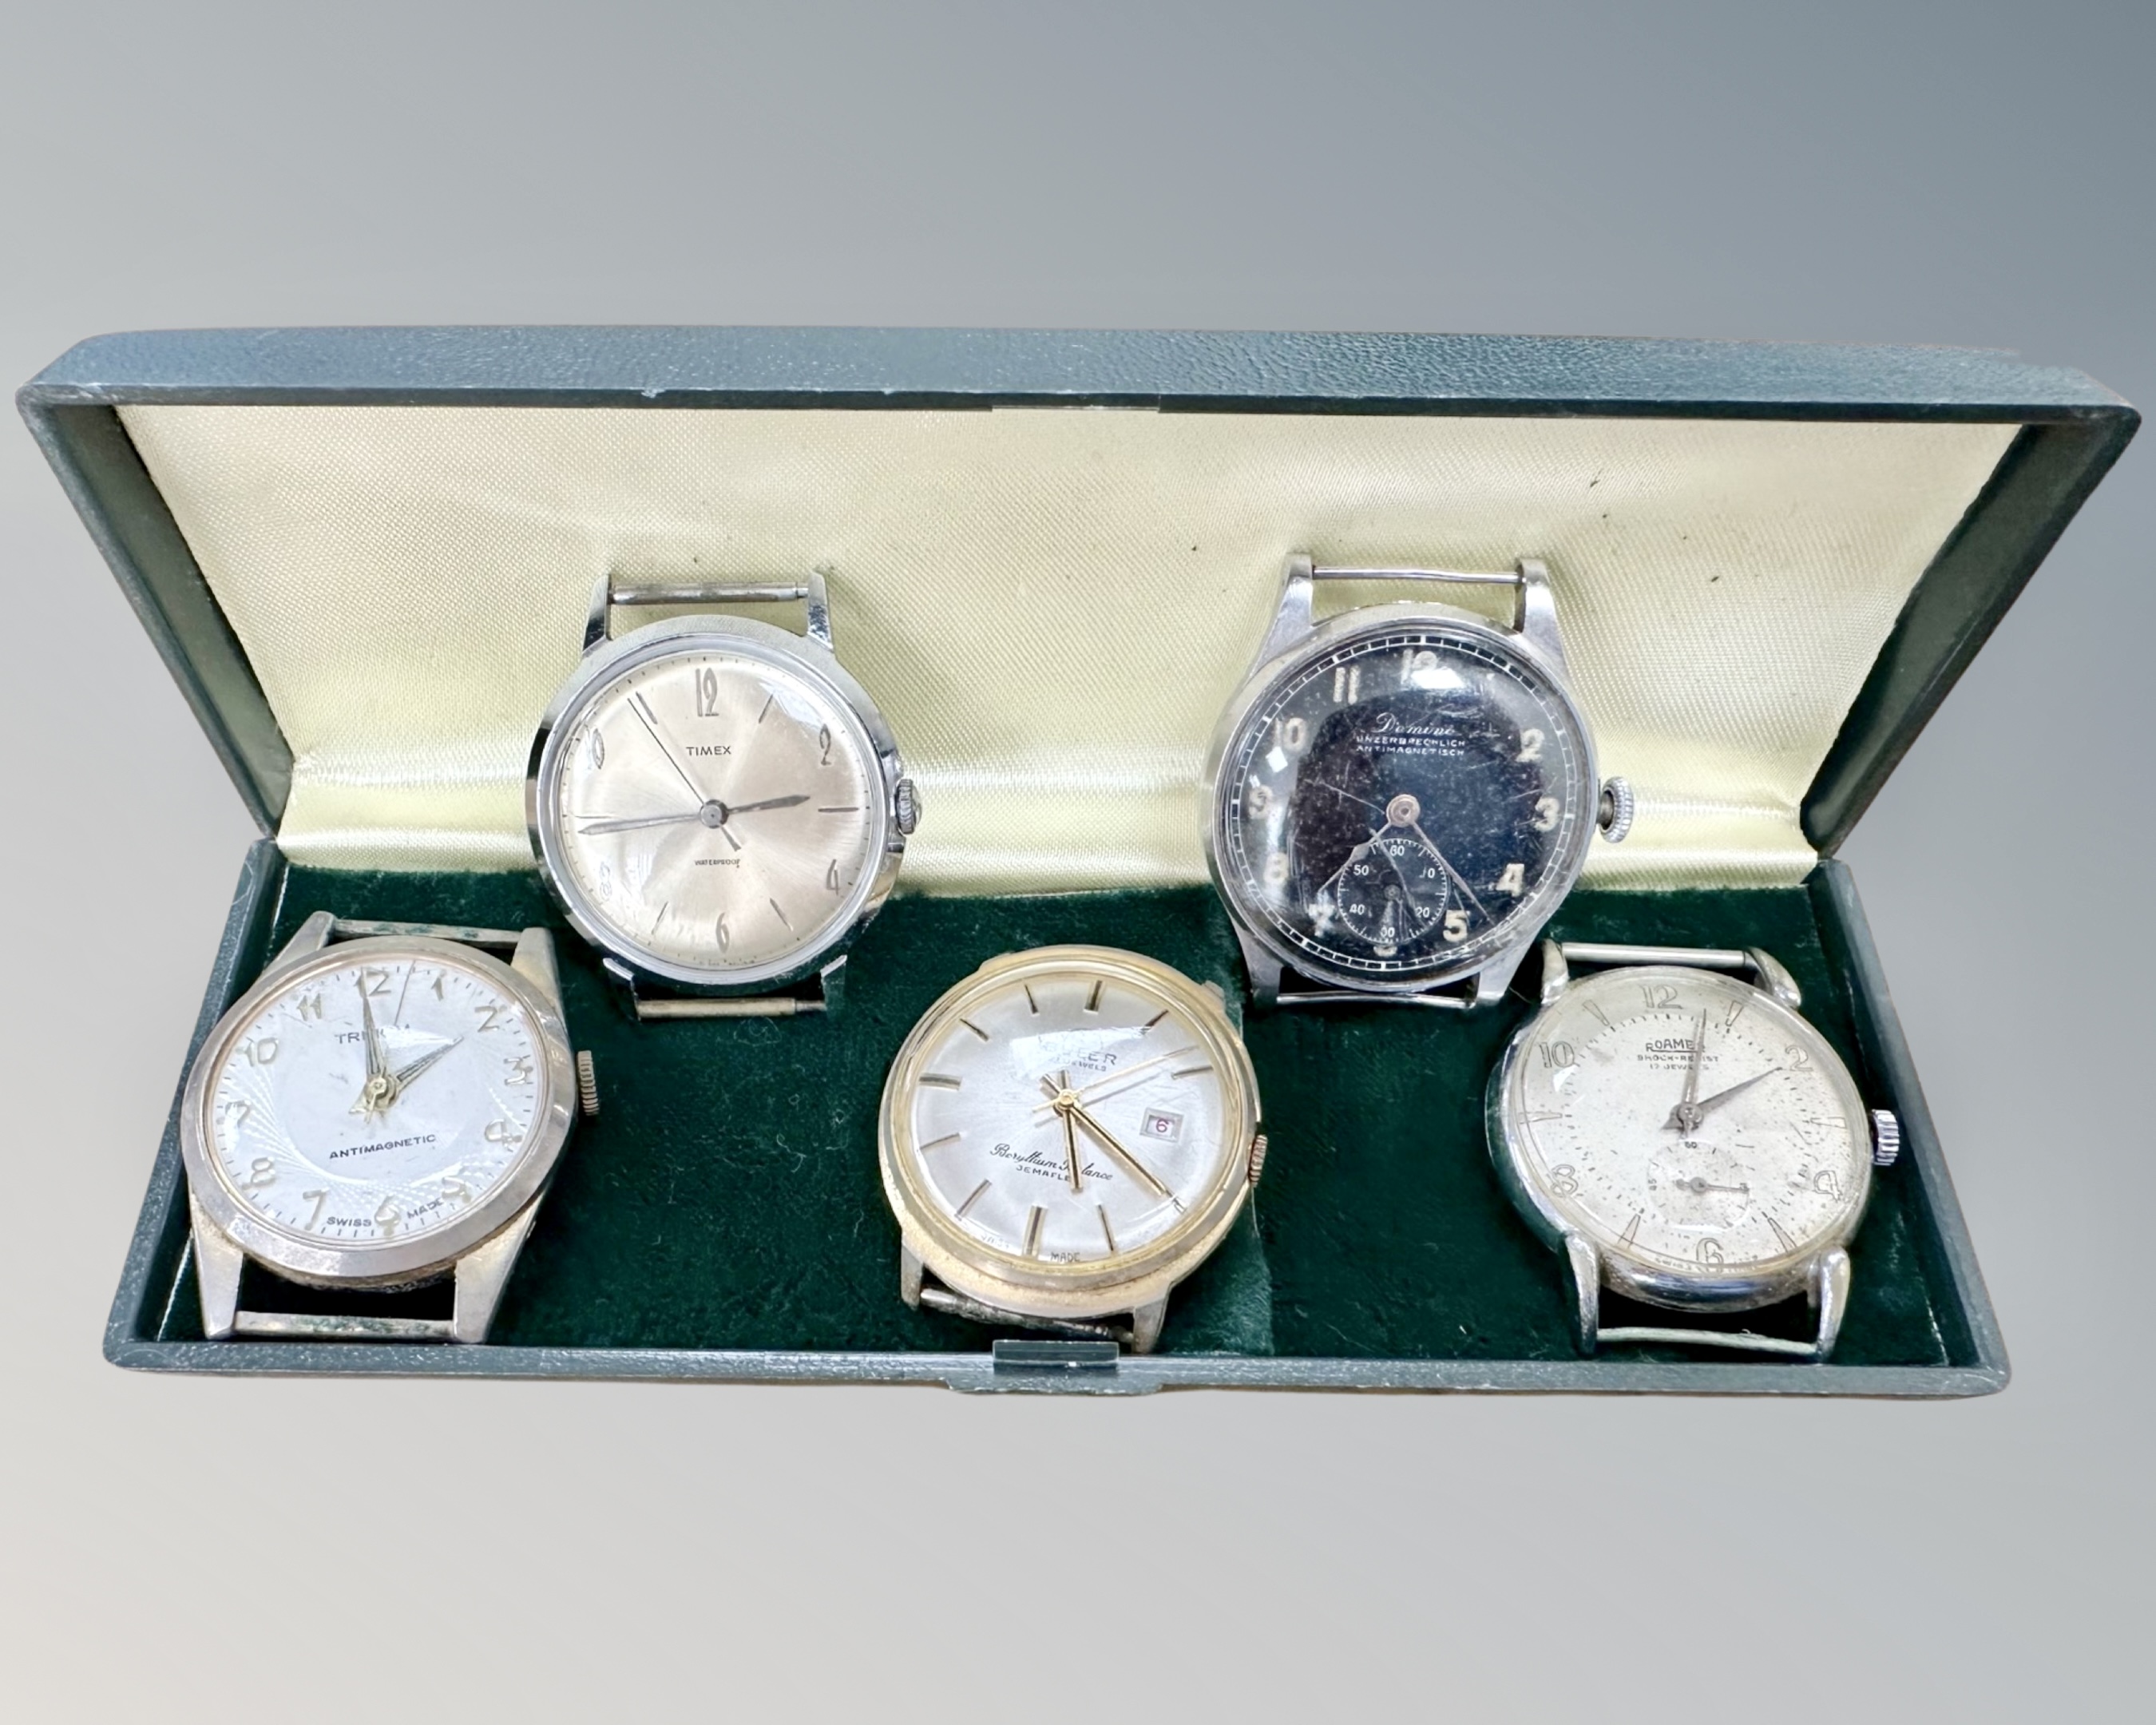 Five vintage gent's wristwatch faces to include Trinom, Timex, Buler, Domino and Roamer.